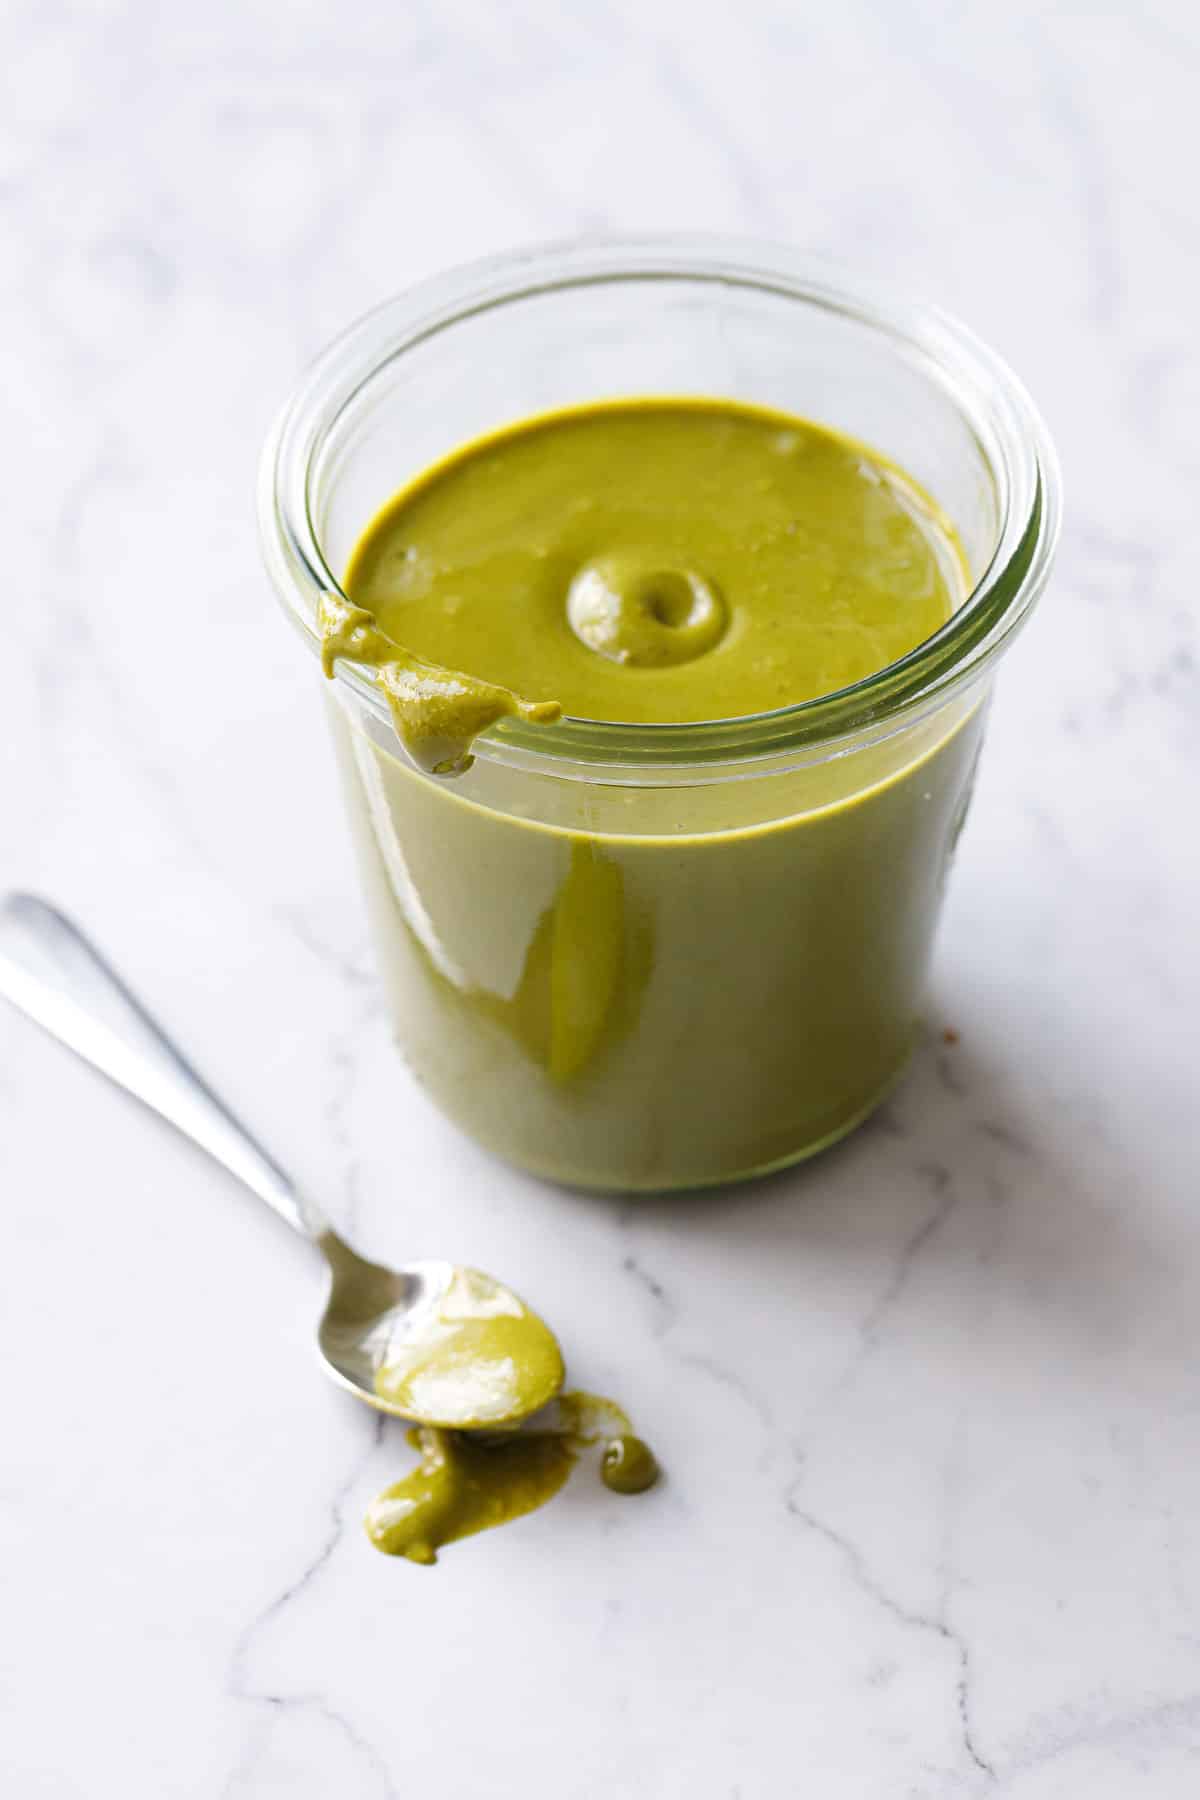 Glass jar of bright green Homemade Pistachio Butter on a marble background, spoonful oozing on the side showing the creamy texture.